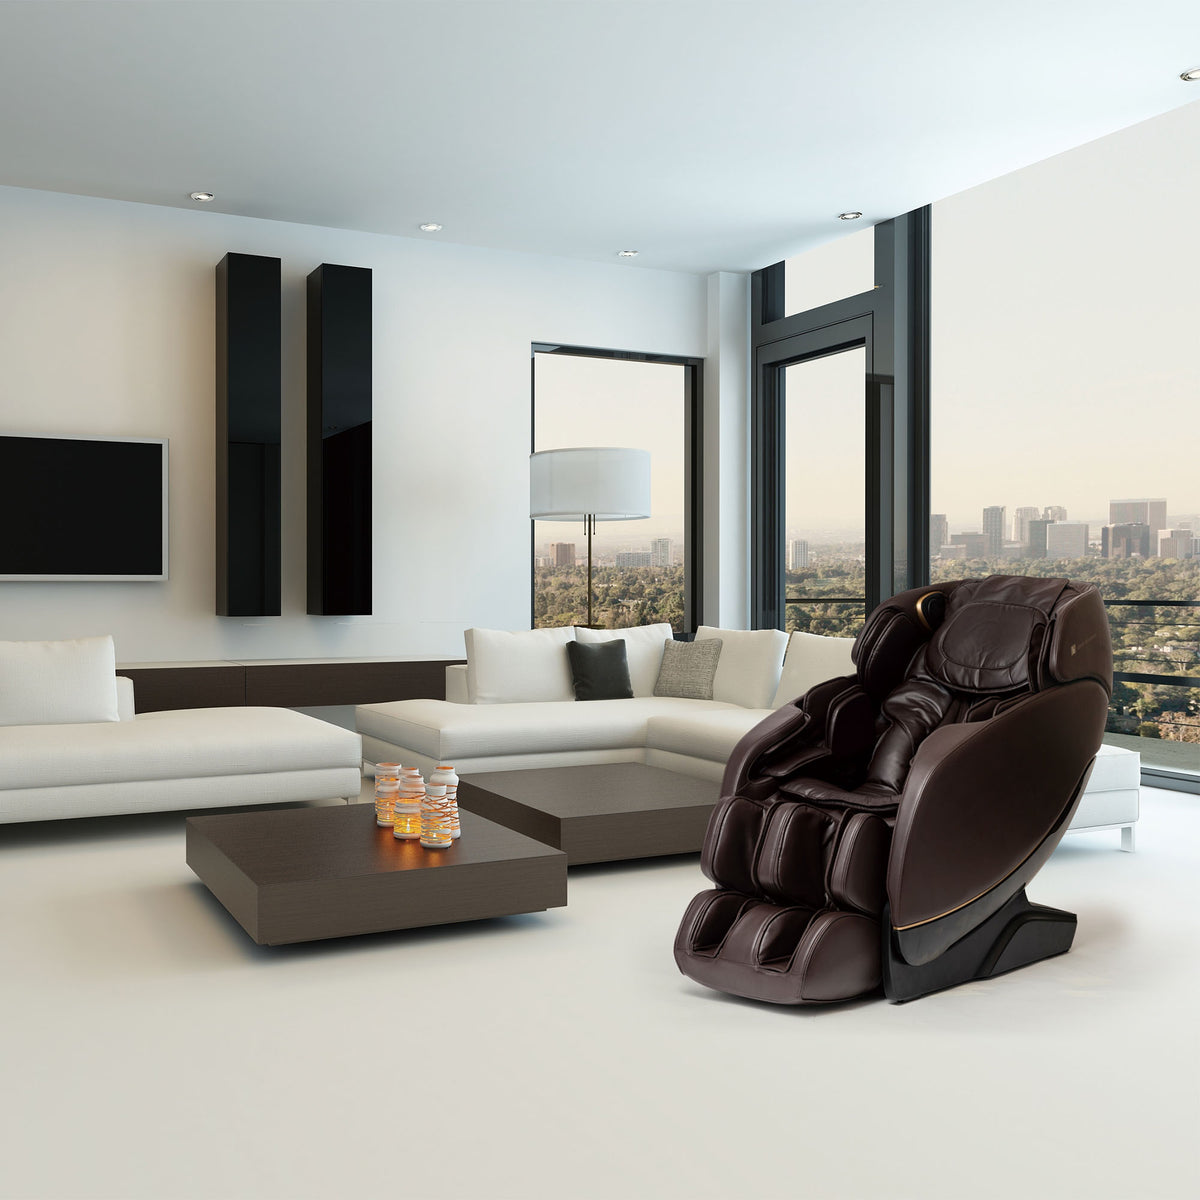 Brown leather Inner Balance Wellness Jin 2.0 Massage Chair with elegant gold trim, positioned in a sleek penthouse apartment